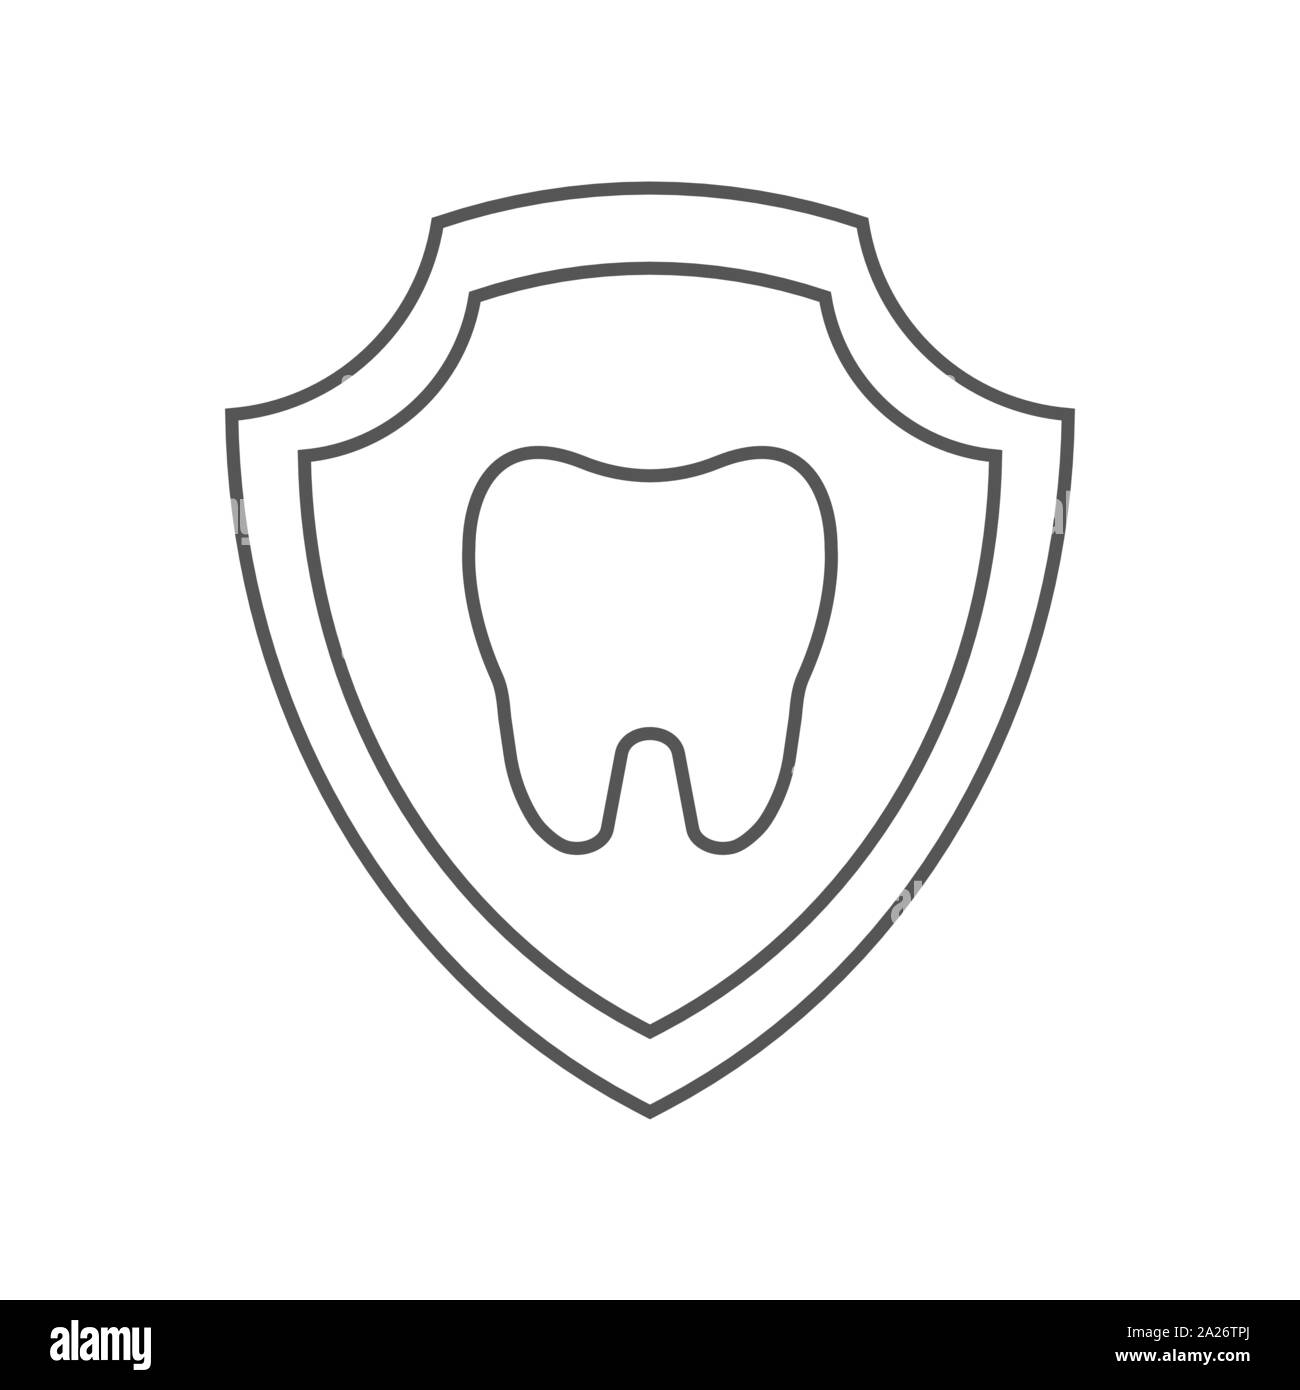 Tooth image inside a shield. Tooth protection idea. EPS 10 Stock Vector